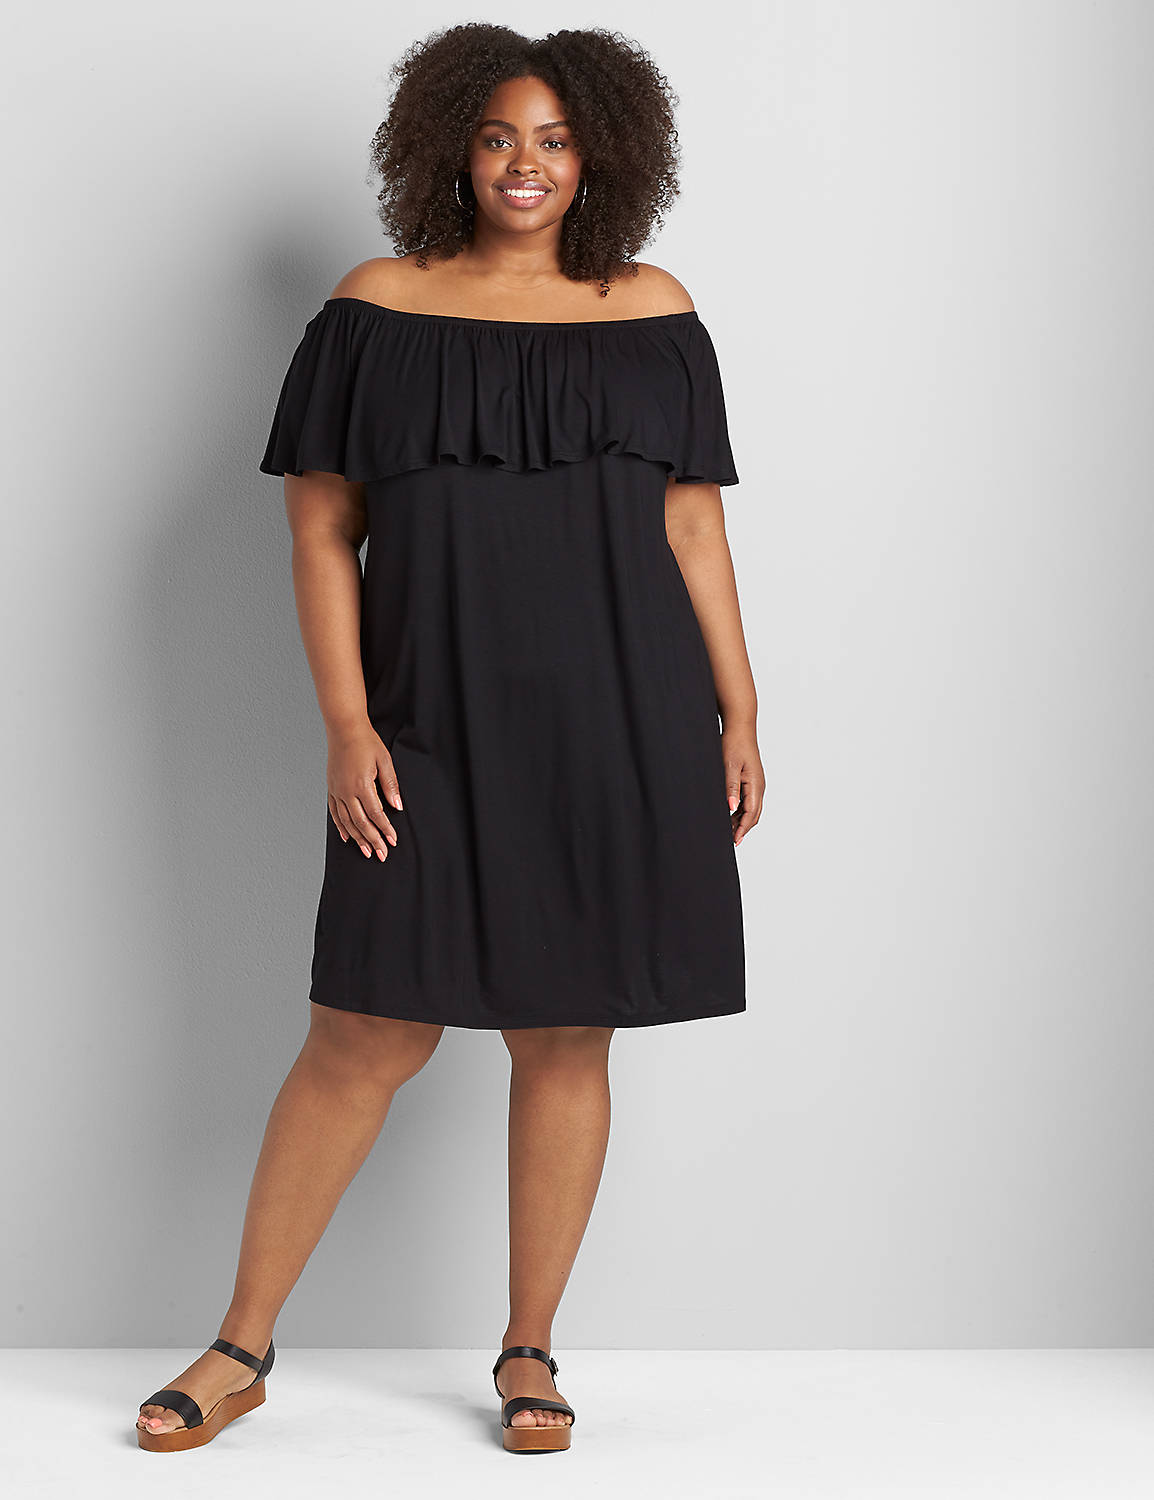 Convertible Off-The-Shoulder A-Line Dress Product Image 1